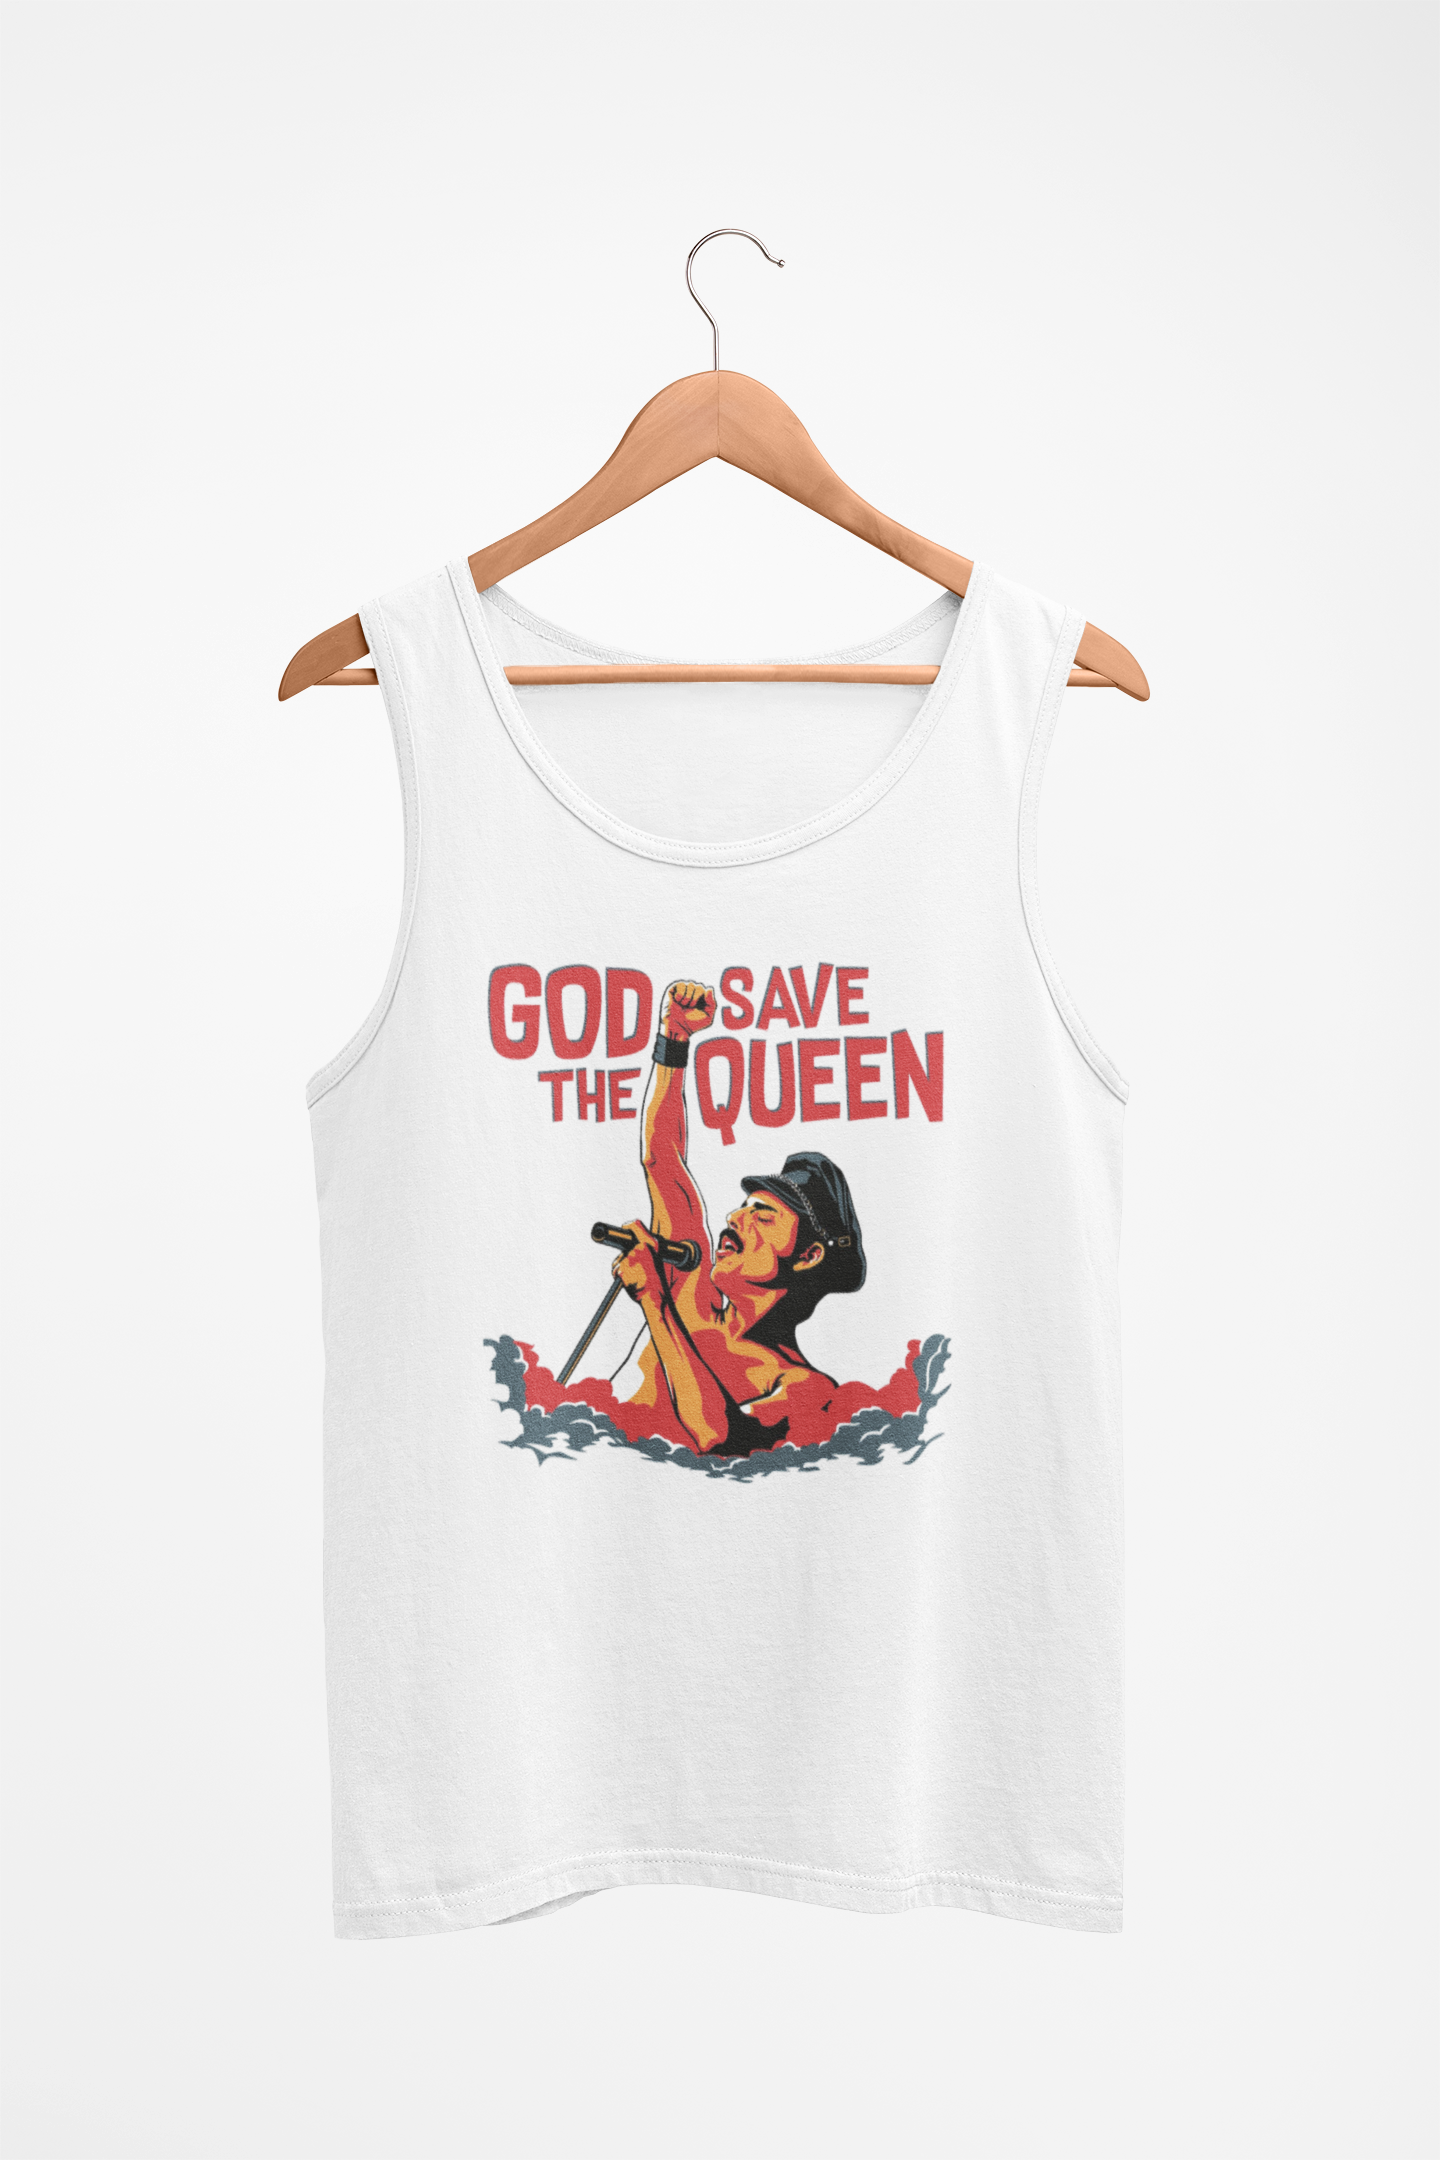 "God Save the Queen" Pop Culture